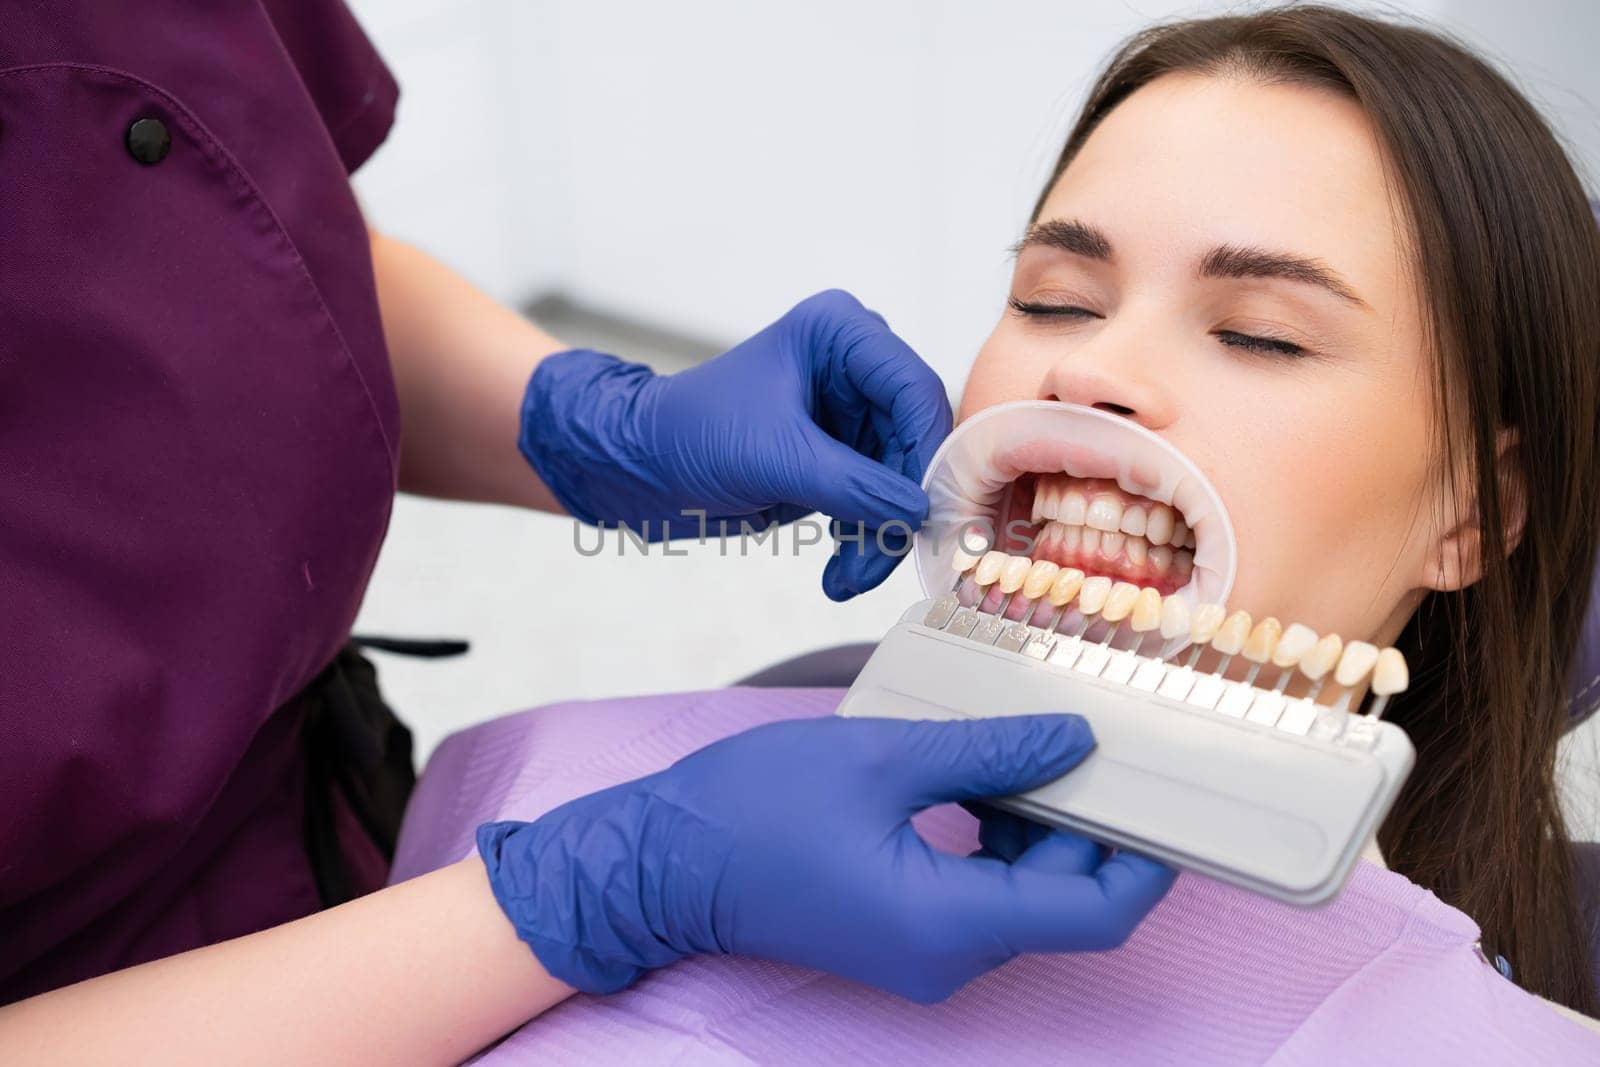 The dentist carefully selects the enamel shade for the young brunette womans teeth before beginning the whitening procedure.